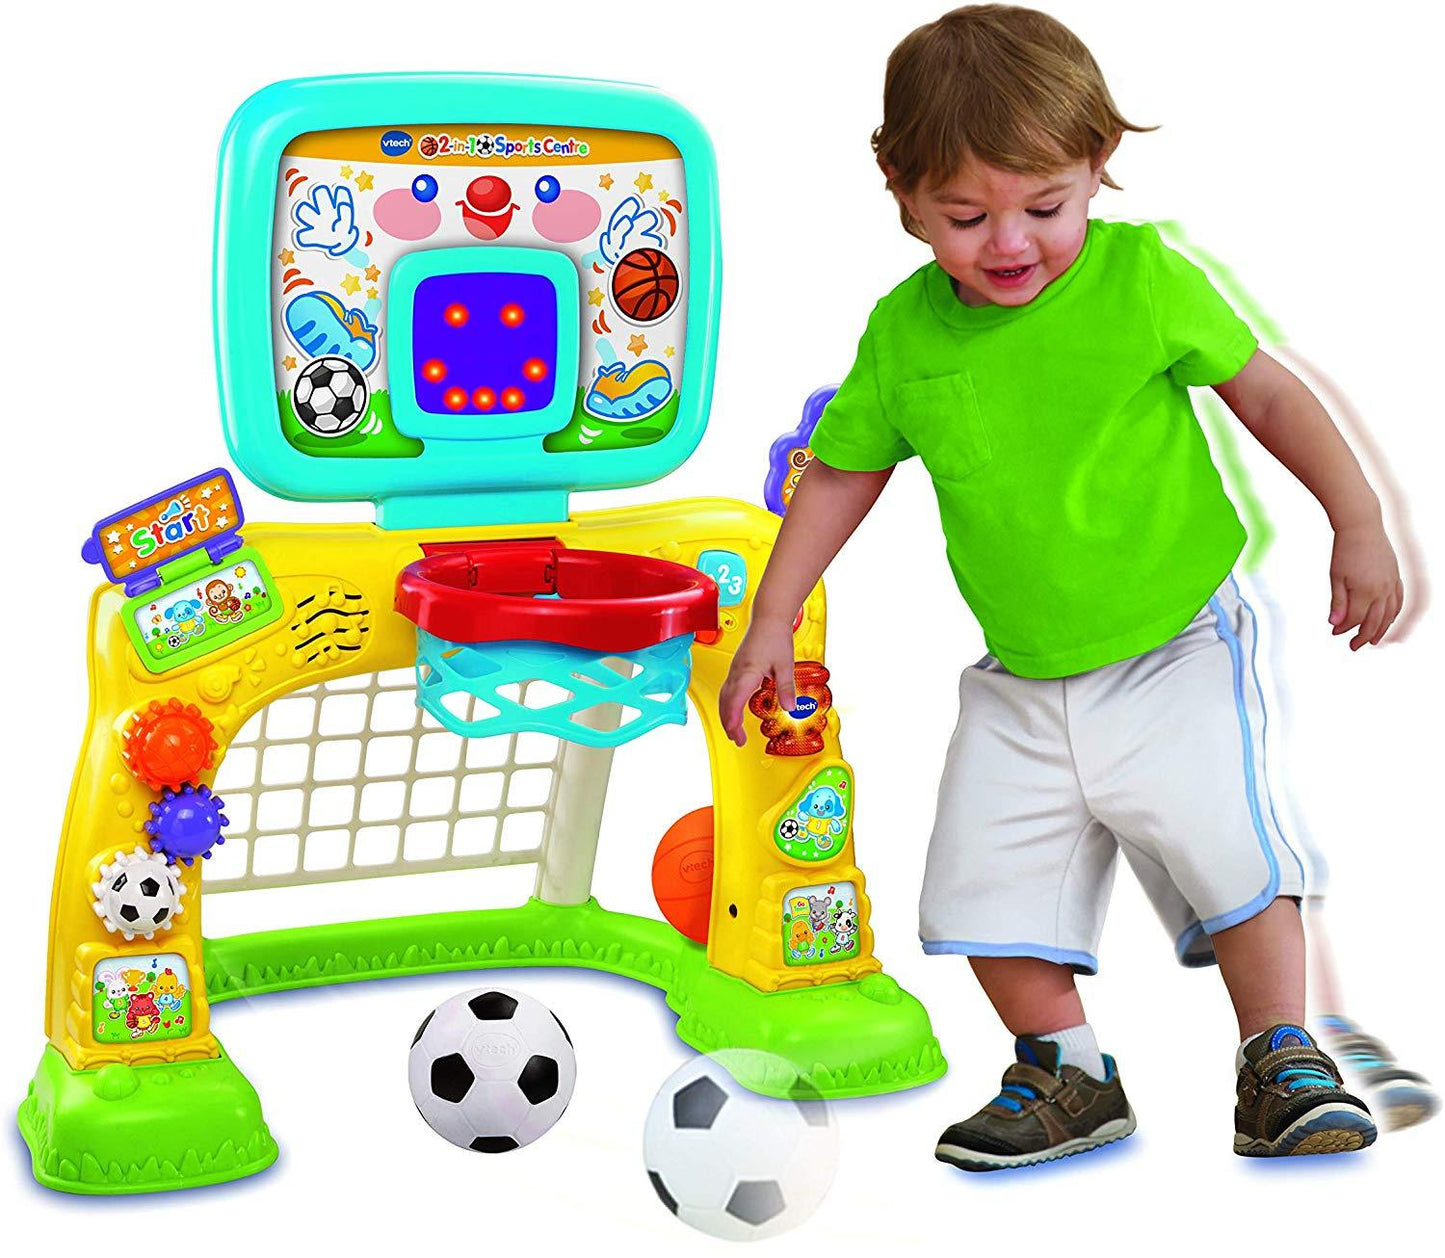 VTech 2-in-1 Sports Centre Anne Claire Baby Store 